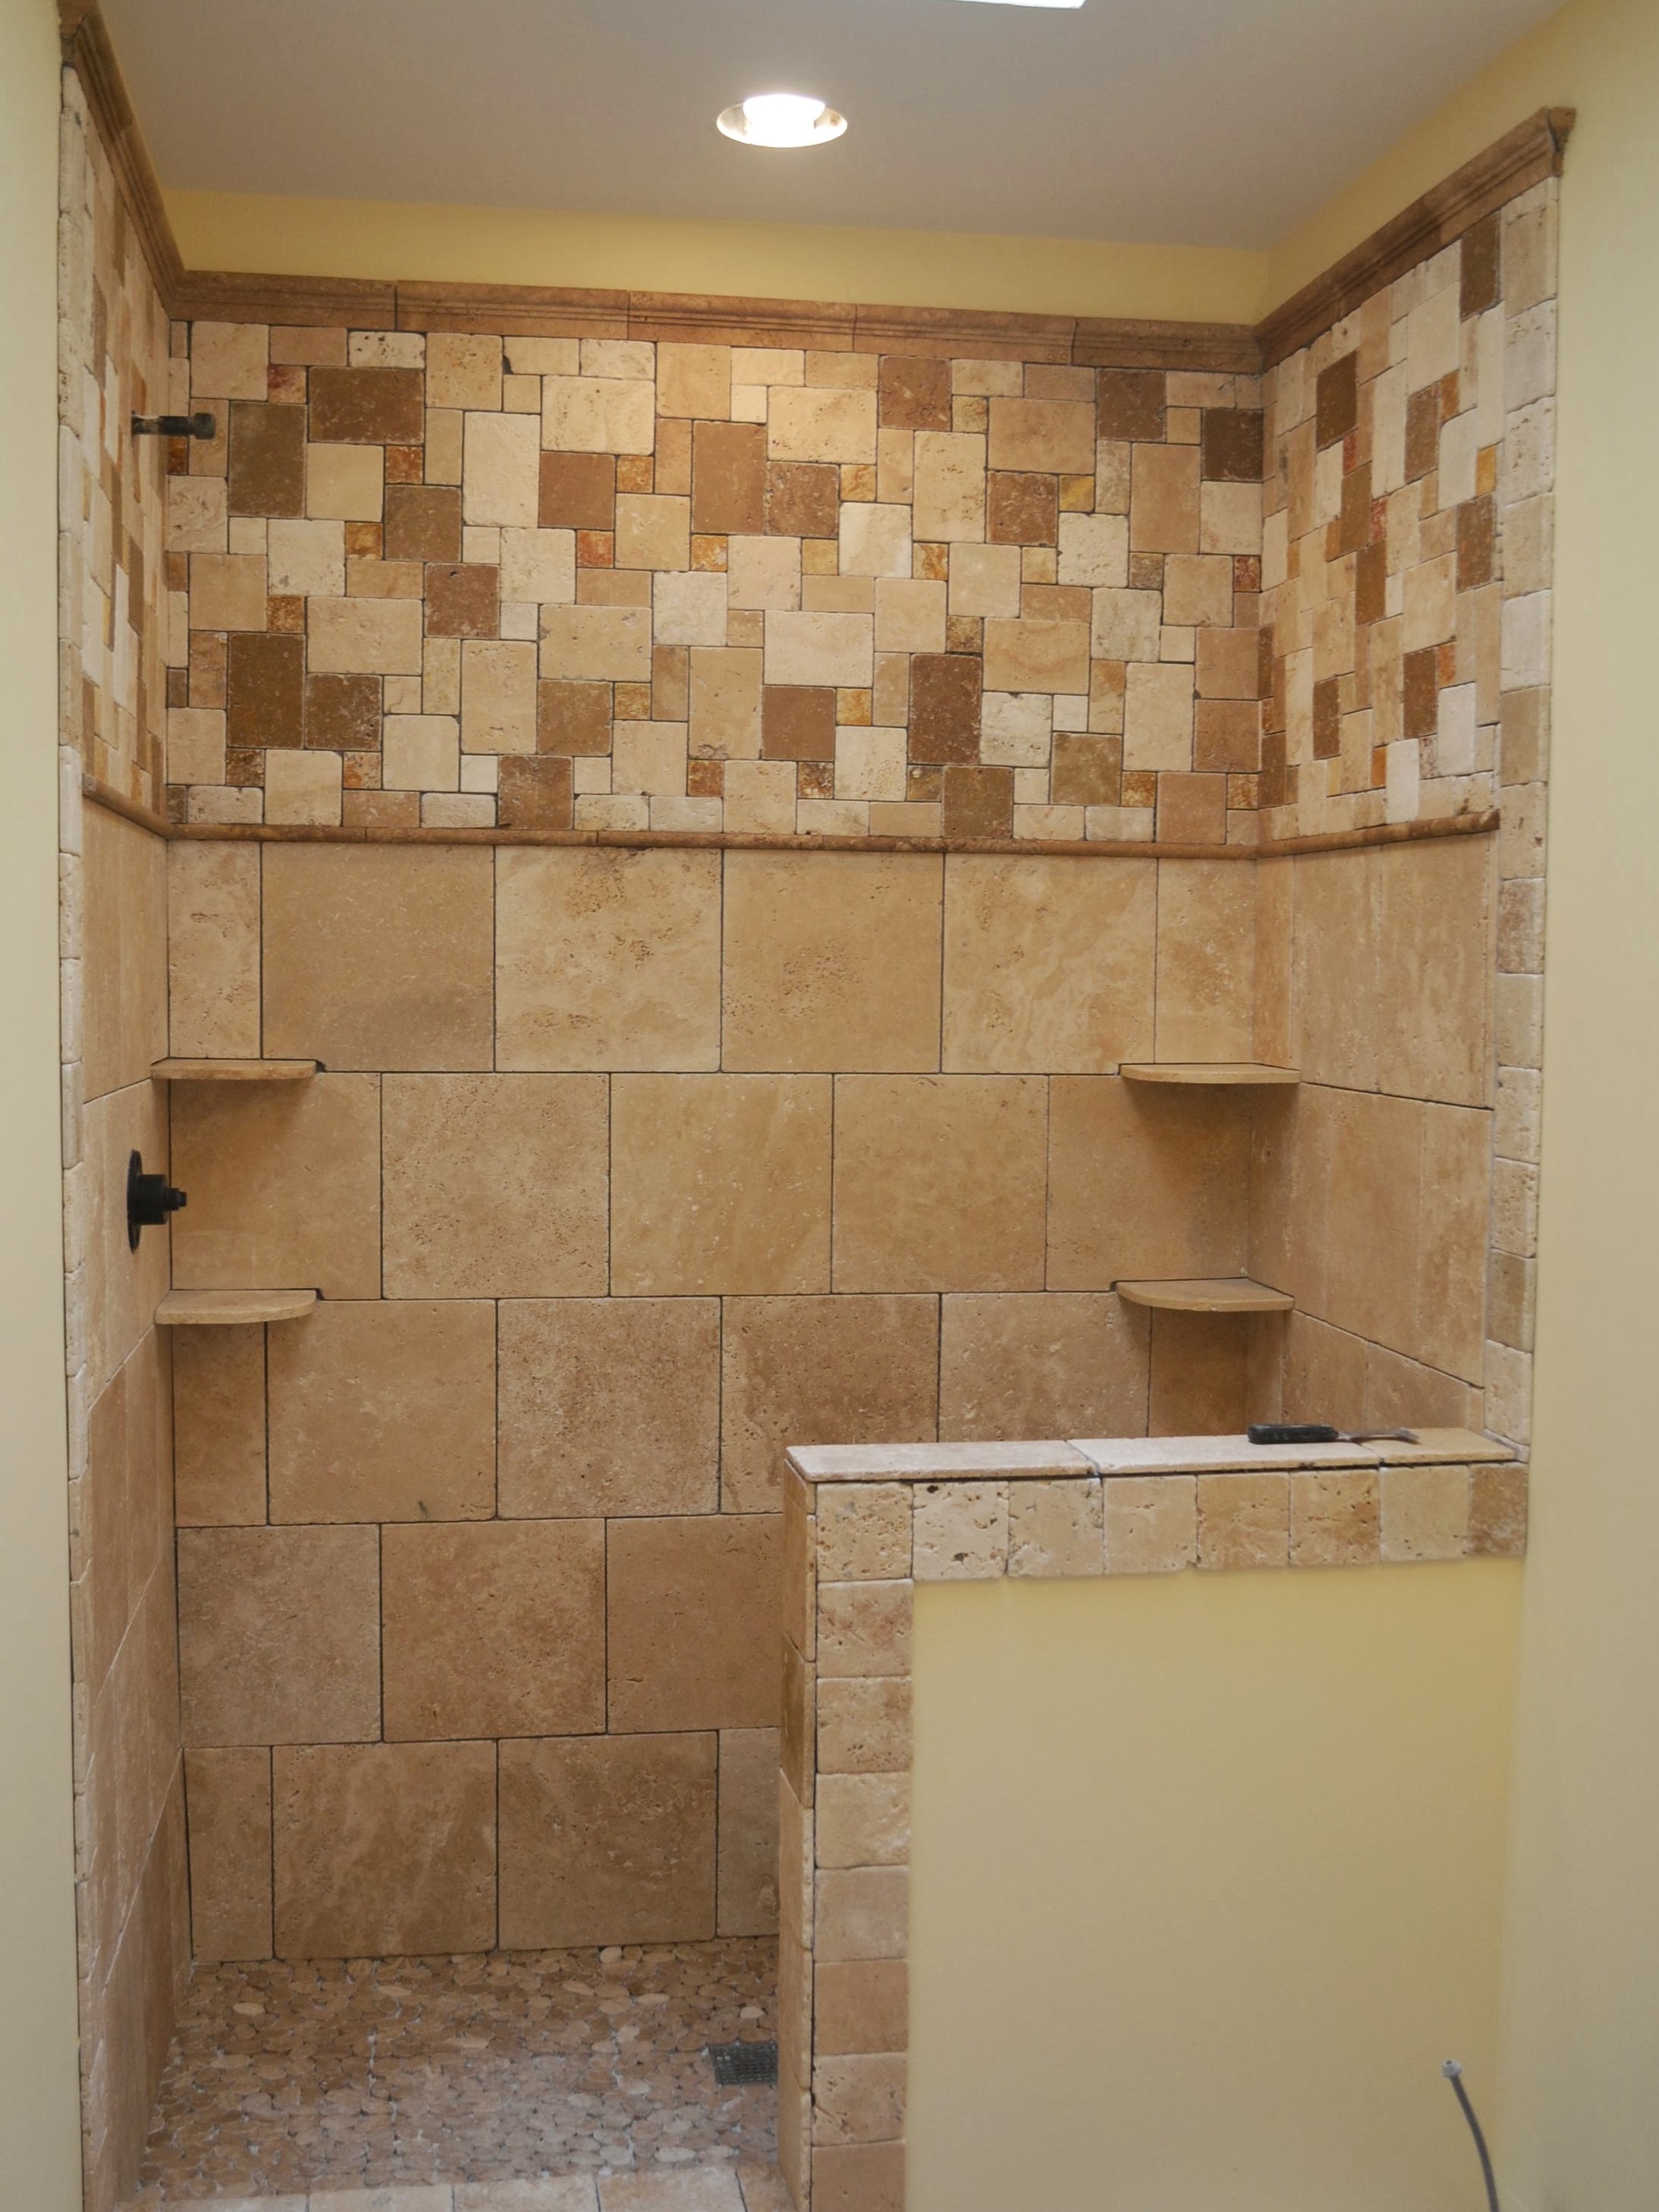 How To Tile A Bathroom Floor And Walls Flooring Tips